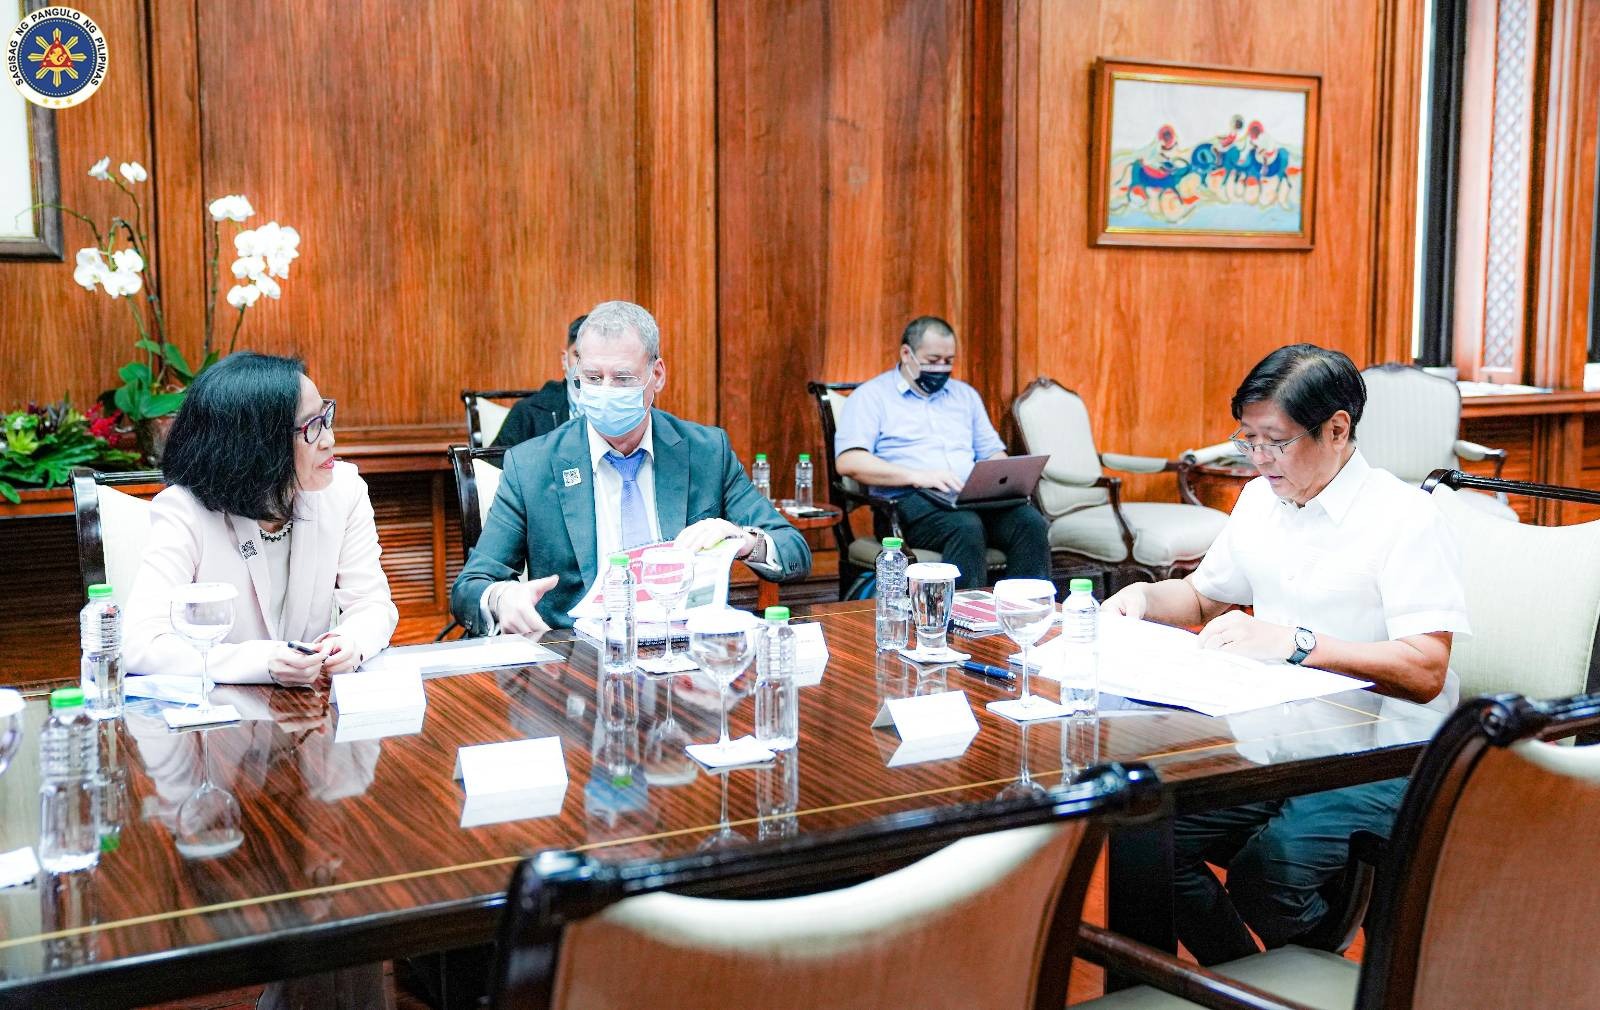 President Ferdinand R. Marcos Jr. met with executives of Chen Yi Agventures